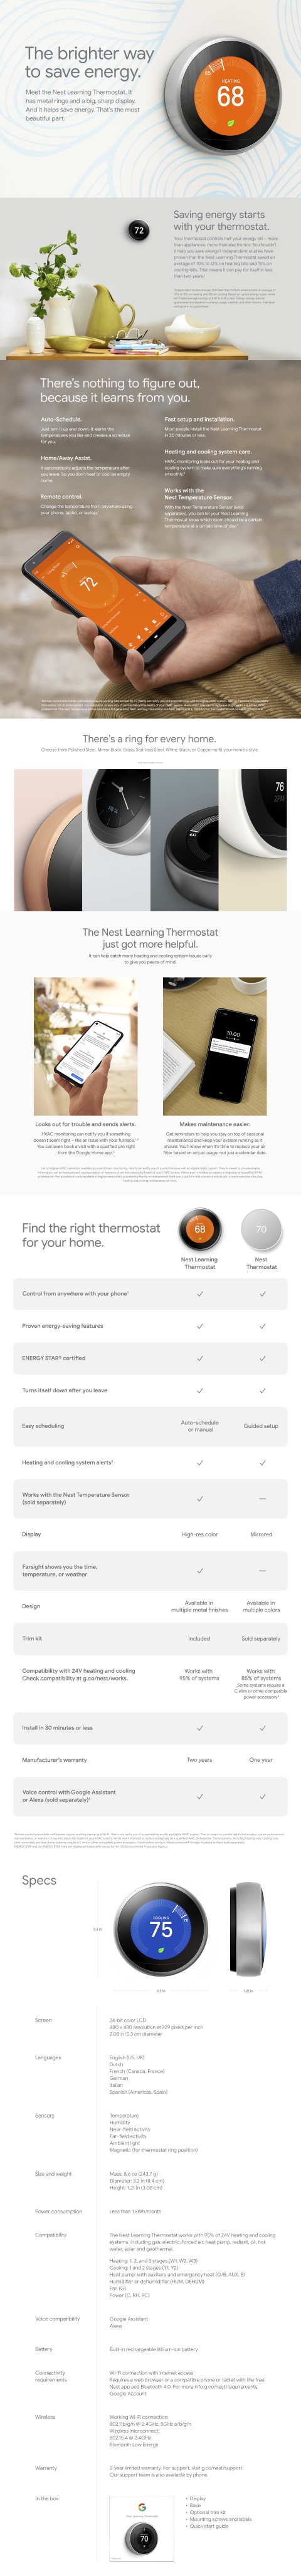 Google Nest Learning Smart Thermostat with WiFi Compatibility (3rd  Generation) - Copper